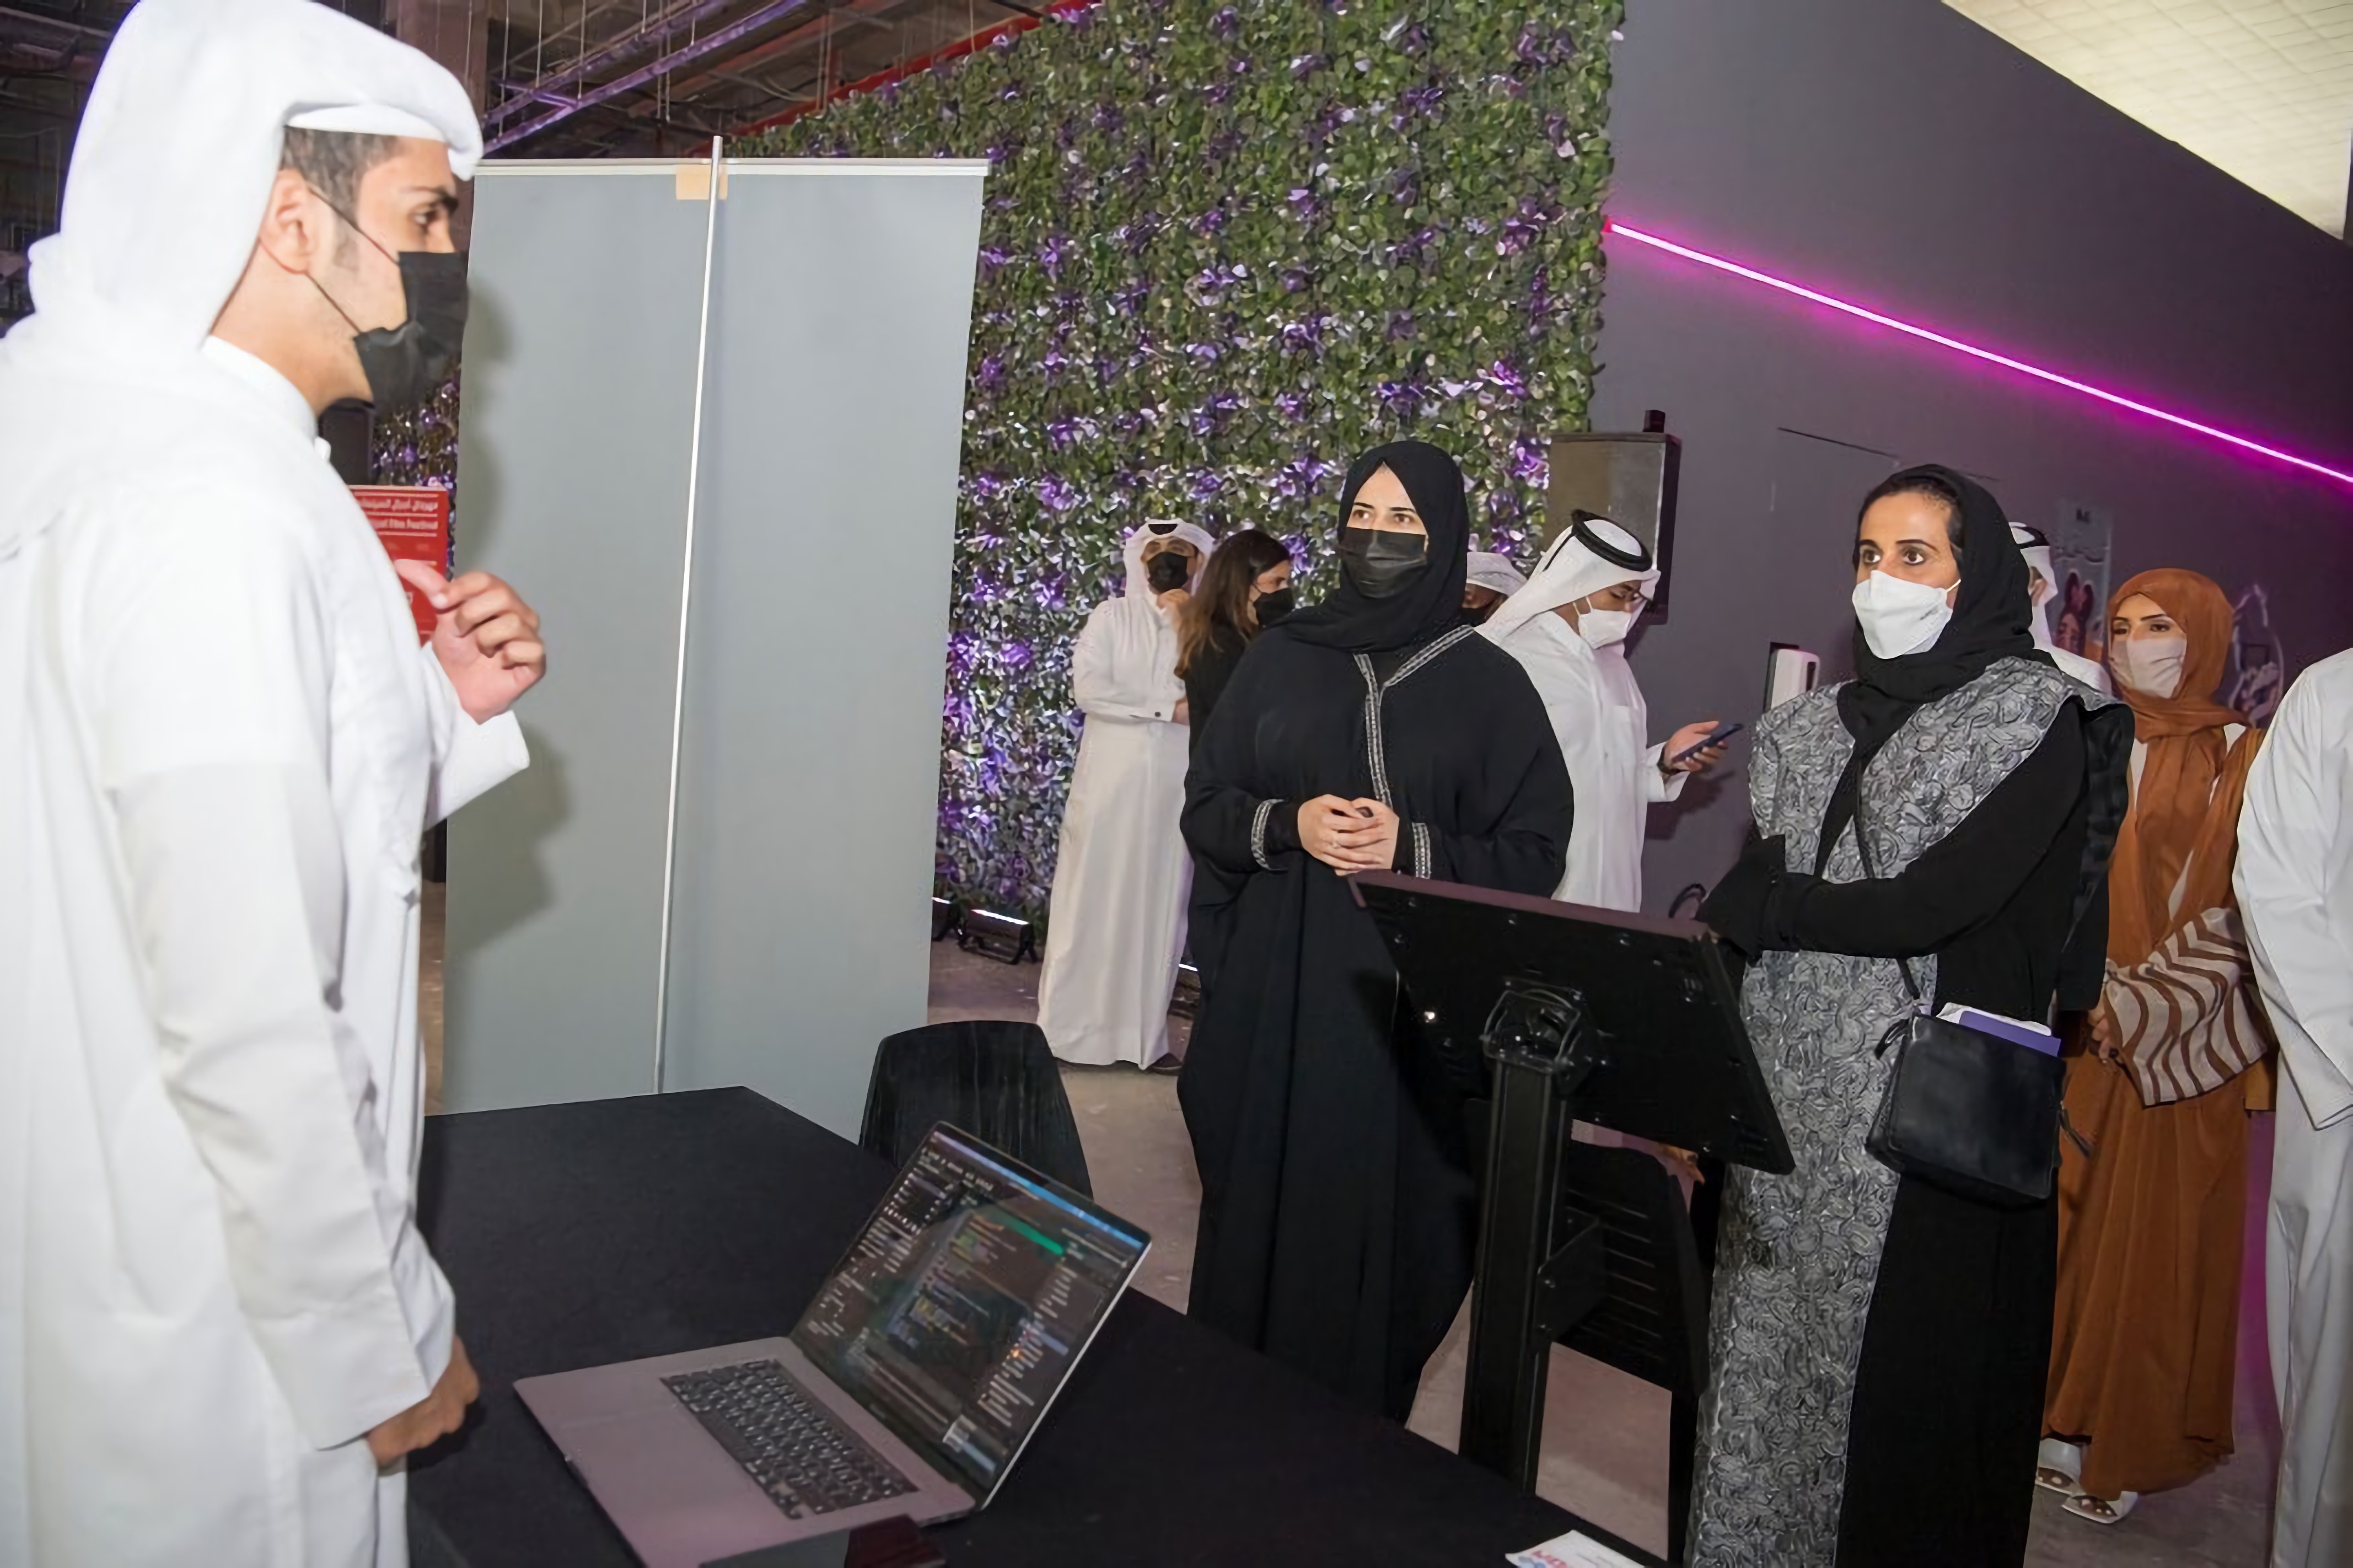 Game developer Khalifa Al-Kuwari showcased his action-platformer adventure game project, Jumbo!, to graming enthusiasts visiting Geekdom, a creative exhibition accompanying the festival.